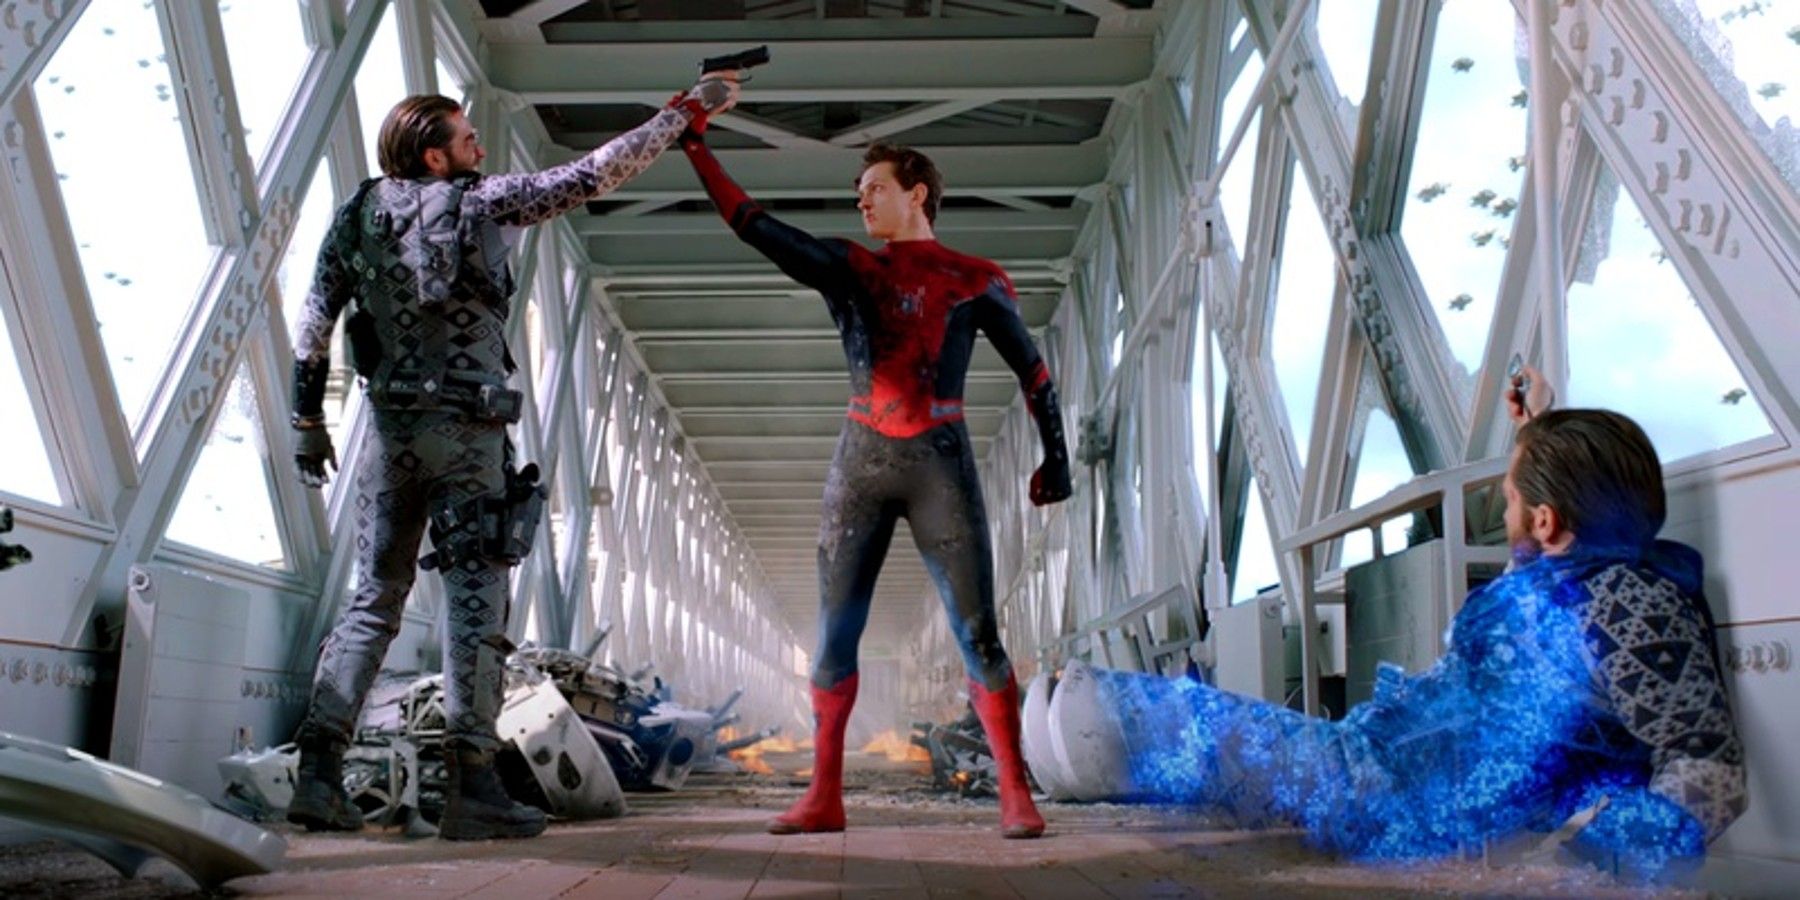 Mysterio and Spider-Man